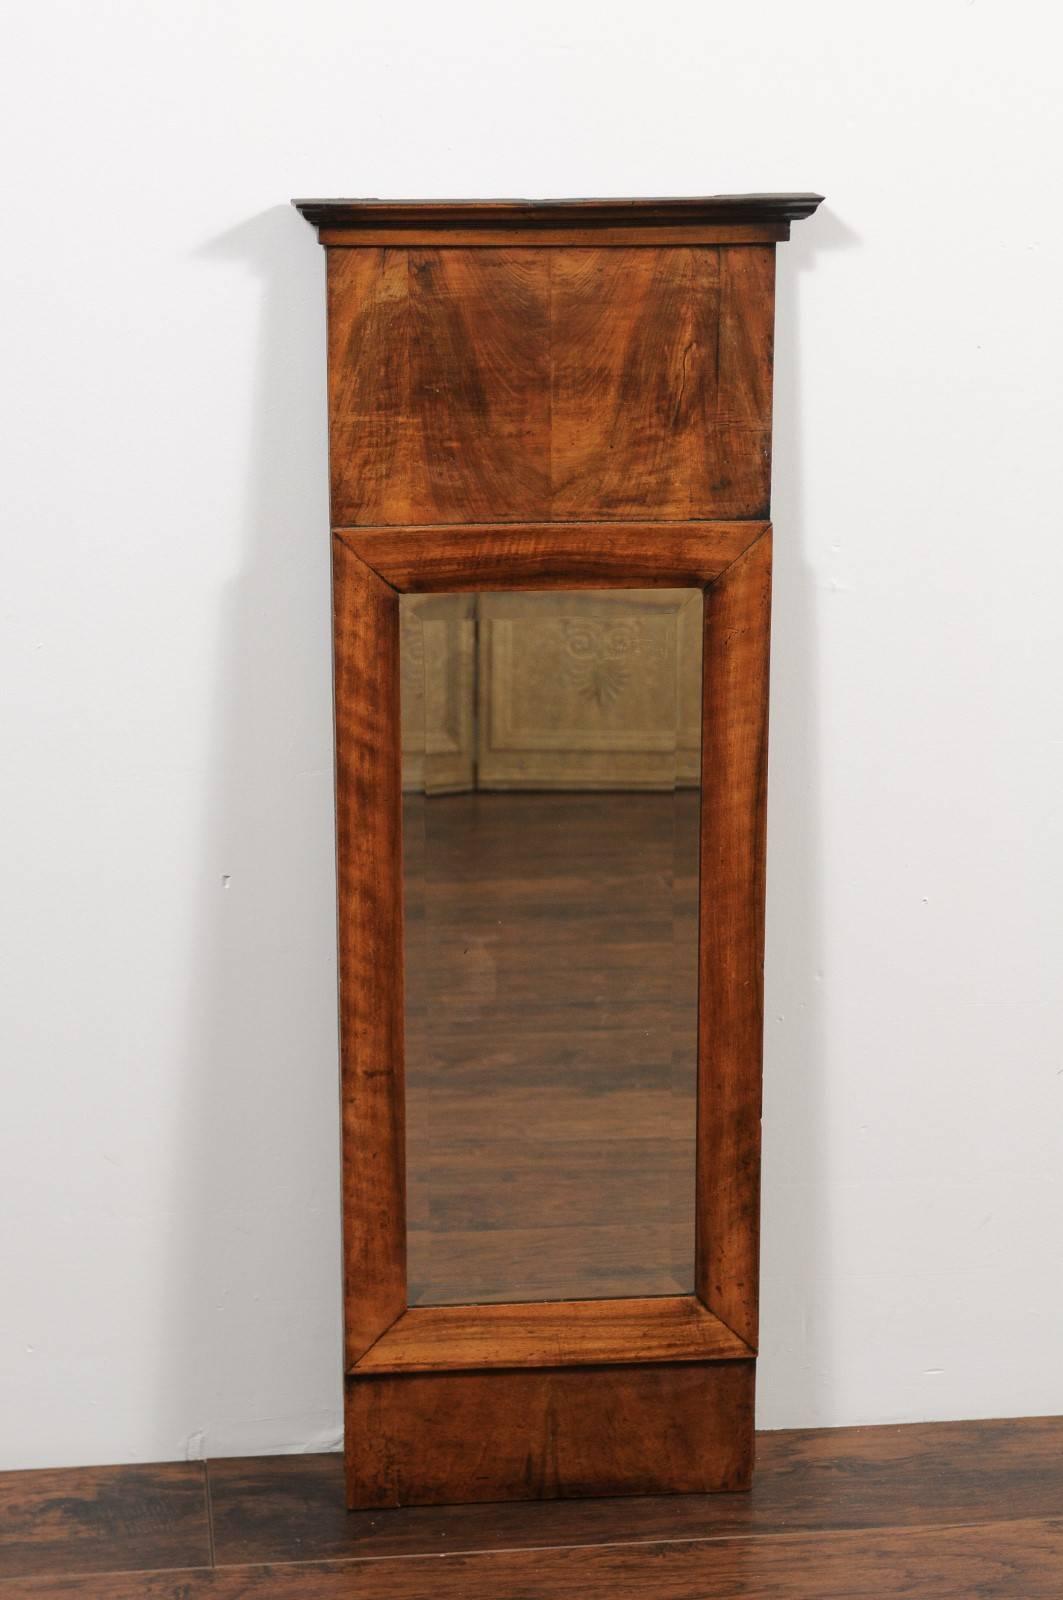 A narrow French walnut veneered mirror from the second half of the 19th century with beveled mirror plate. This French walnut bookmarked-veneer mirror was born in the 1870s, in the later years of the reign of Emperor Napoleon III reign. Featuring a